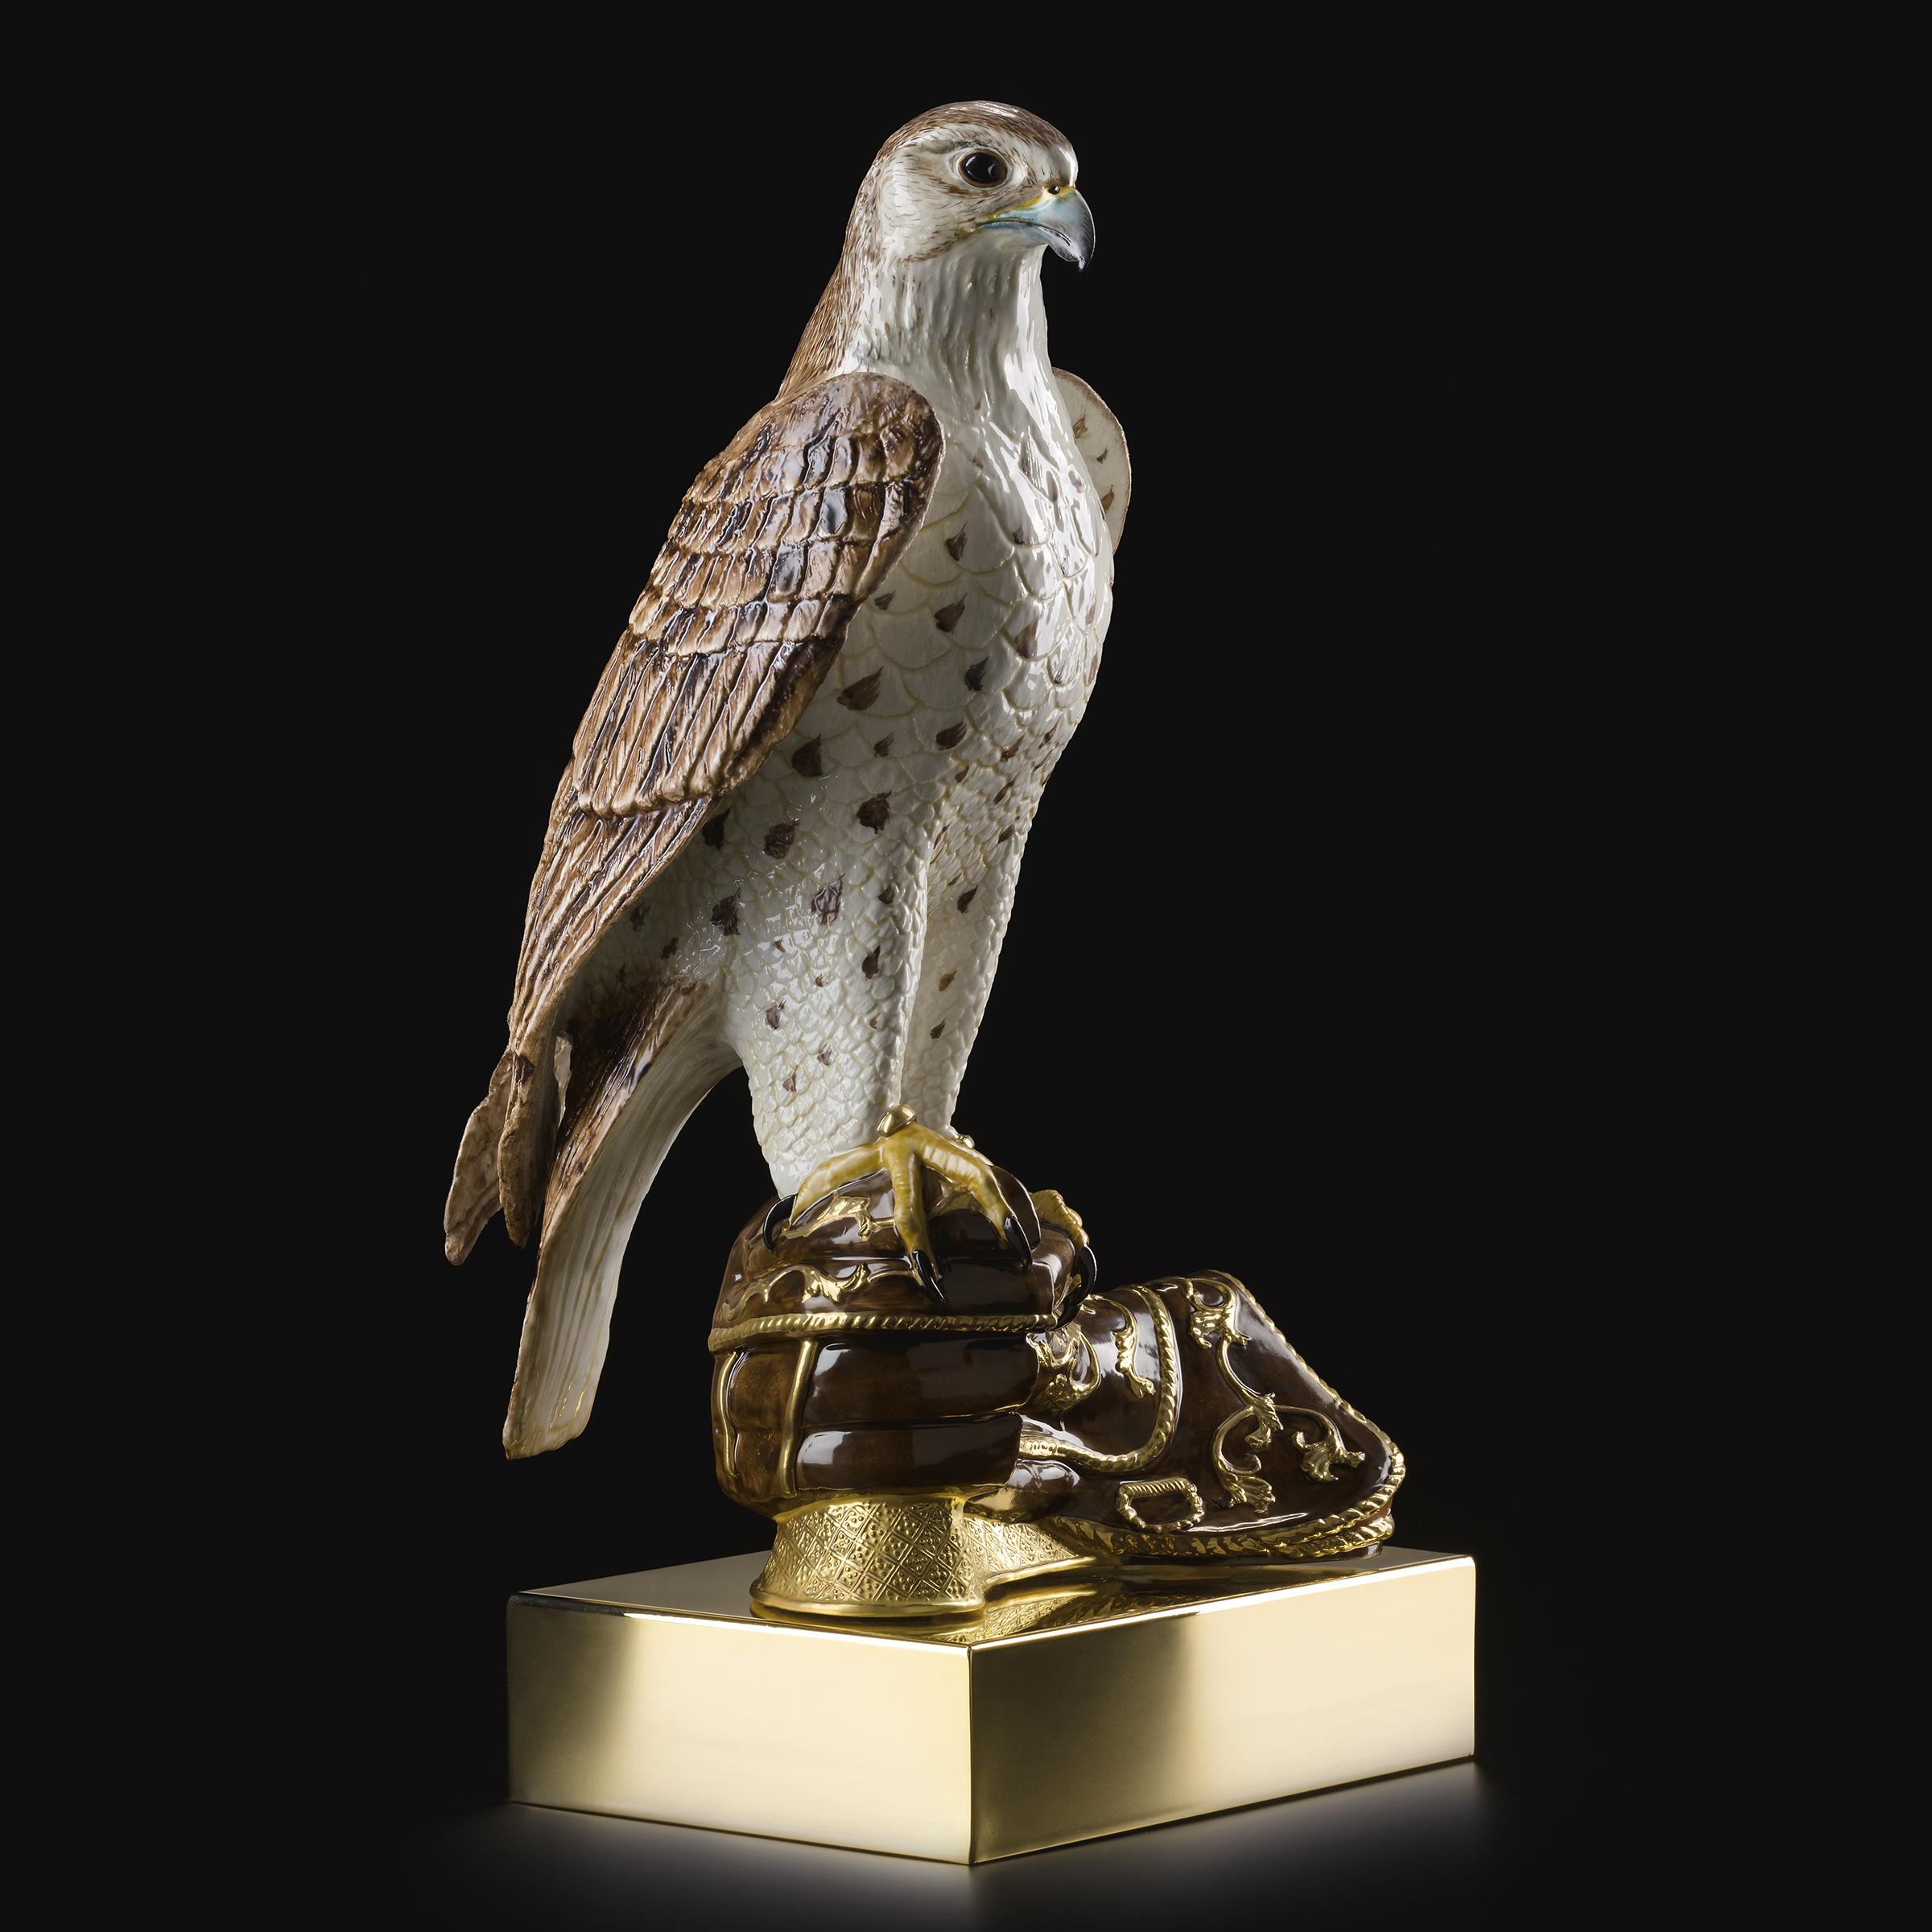 Sculpture falcon in handmade porcelain,
hand painted piece with finishing in gold 24-karat
Limited Edition of 300 pieces.